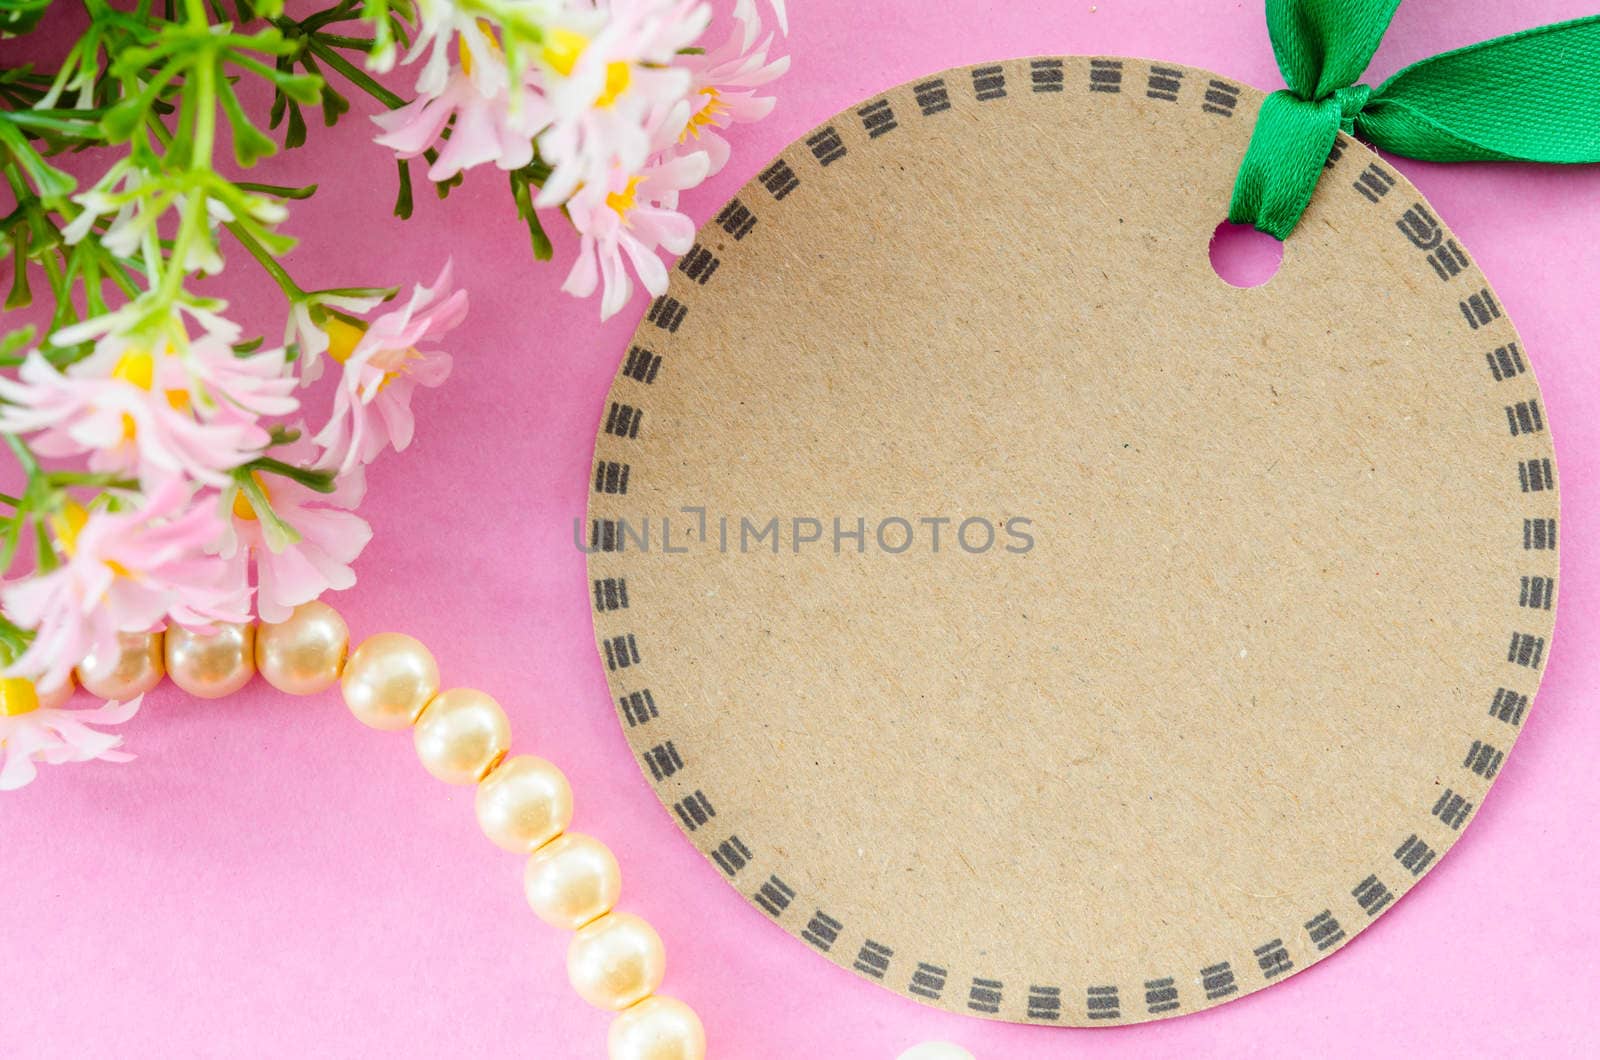 Blank brown tag circle shape and green ribbon with flower on pink background.